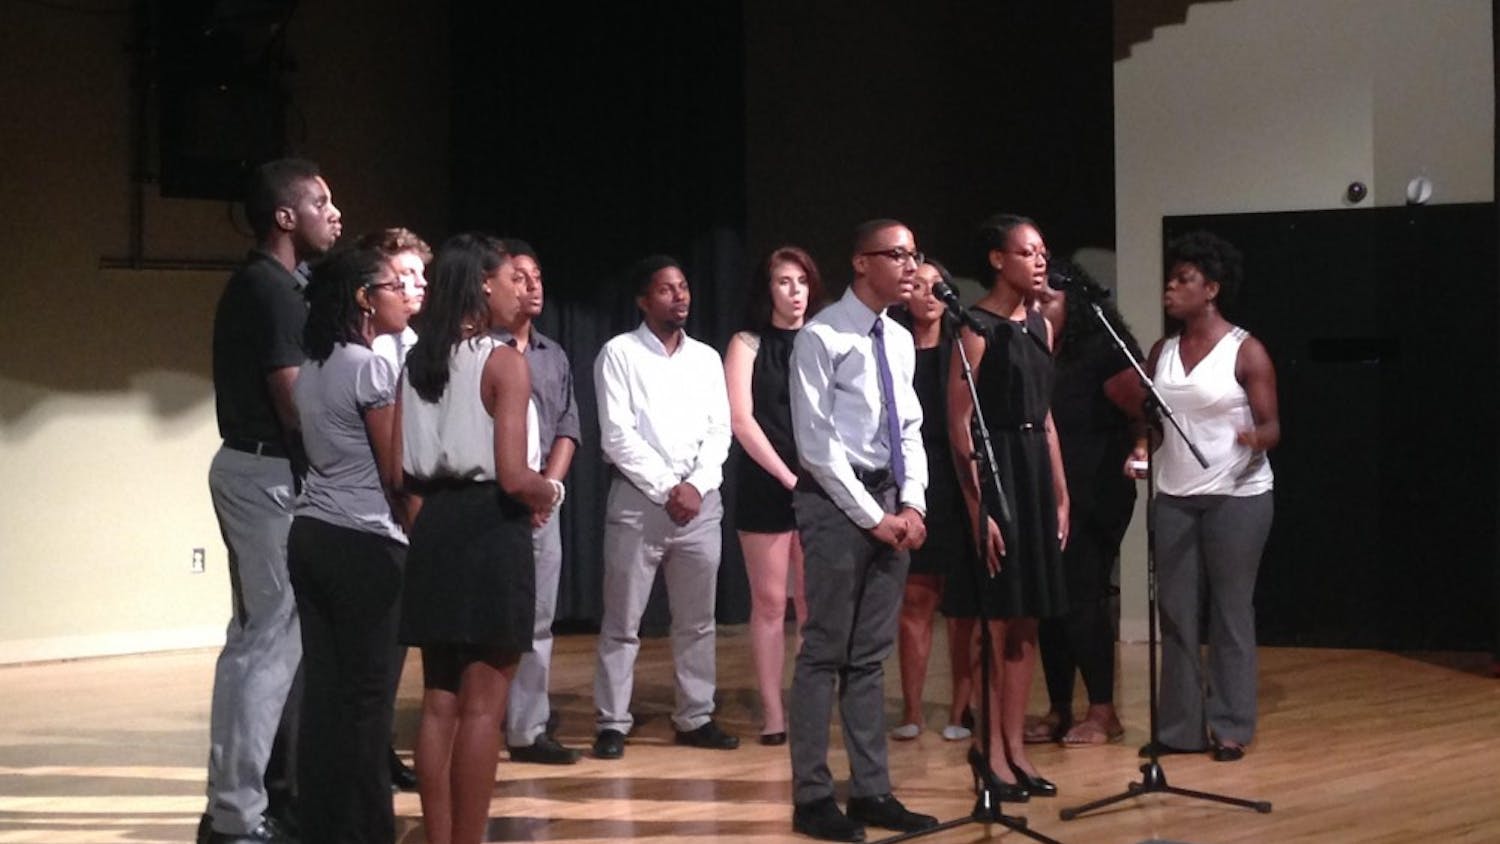 The Harmonyx, a sub group of the Black Student Movement, performs as a part of a BSM meeting.